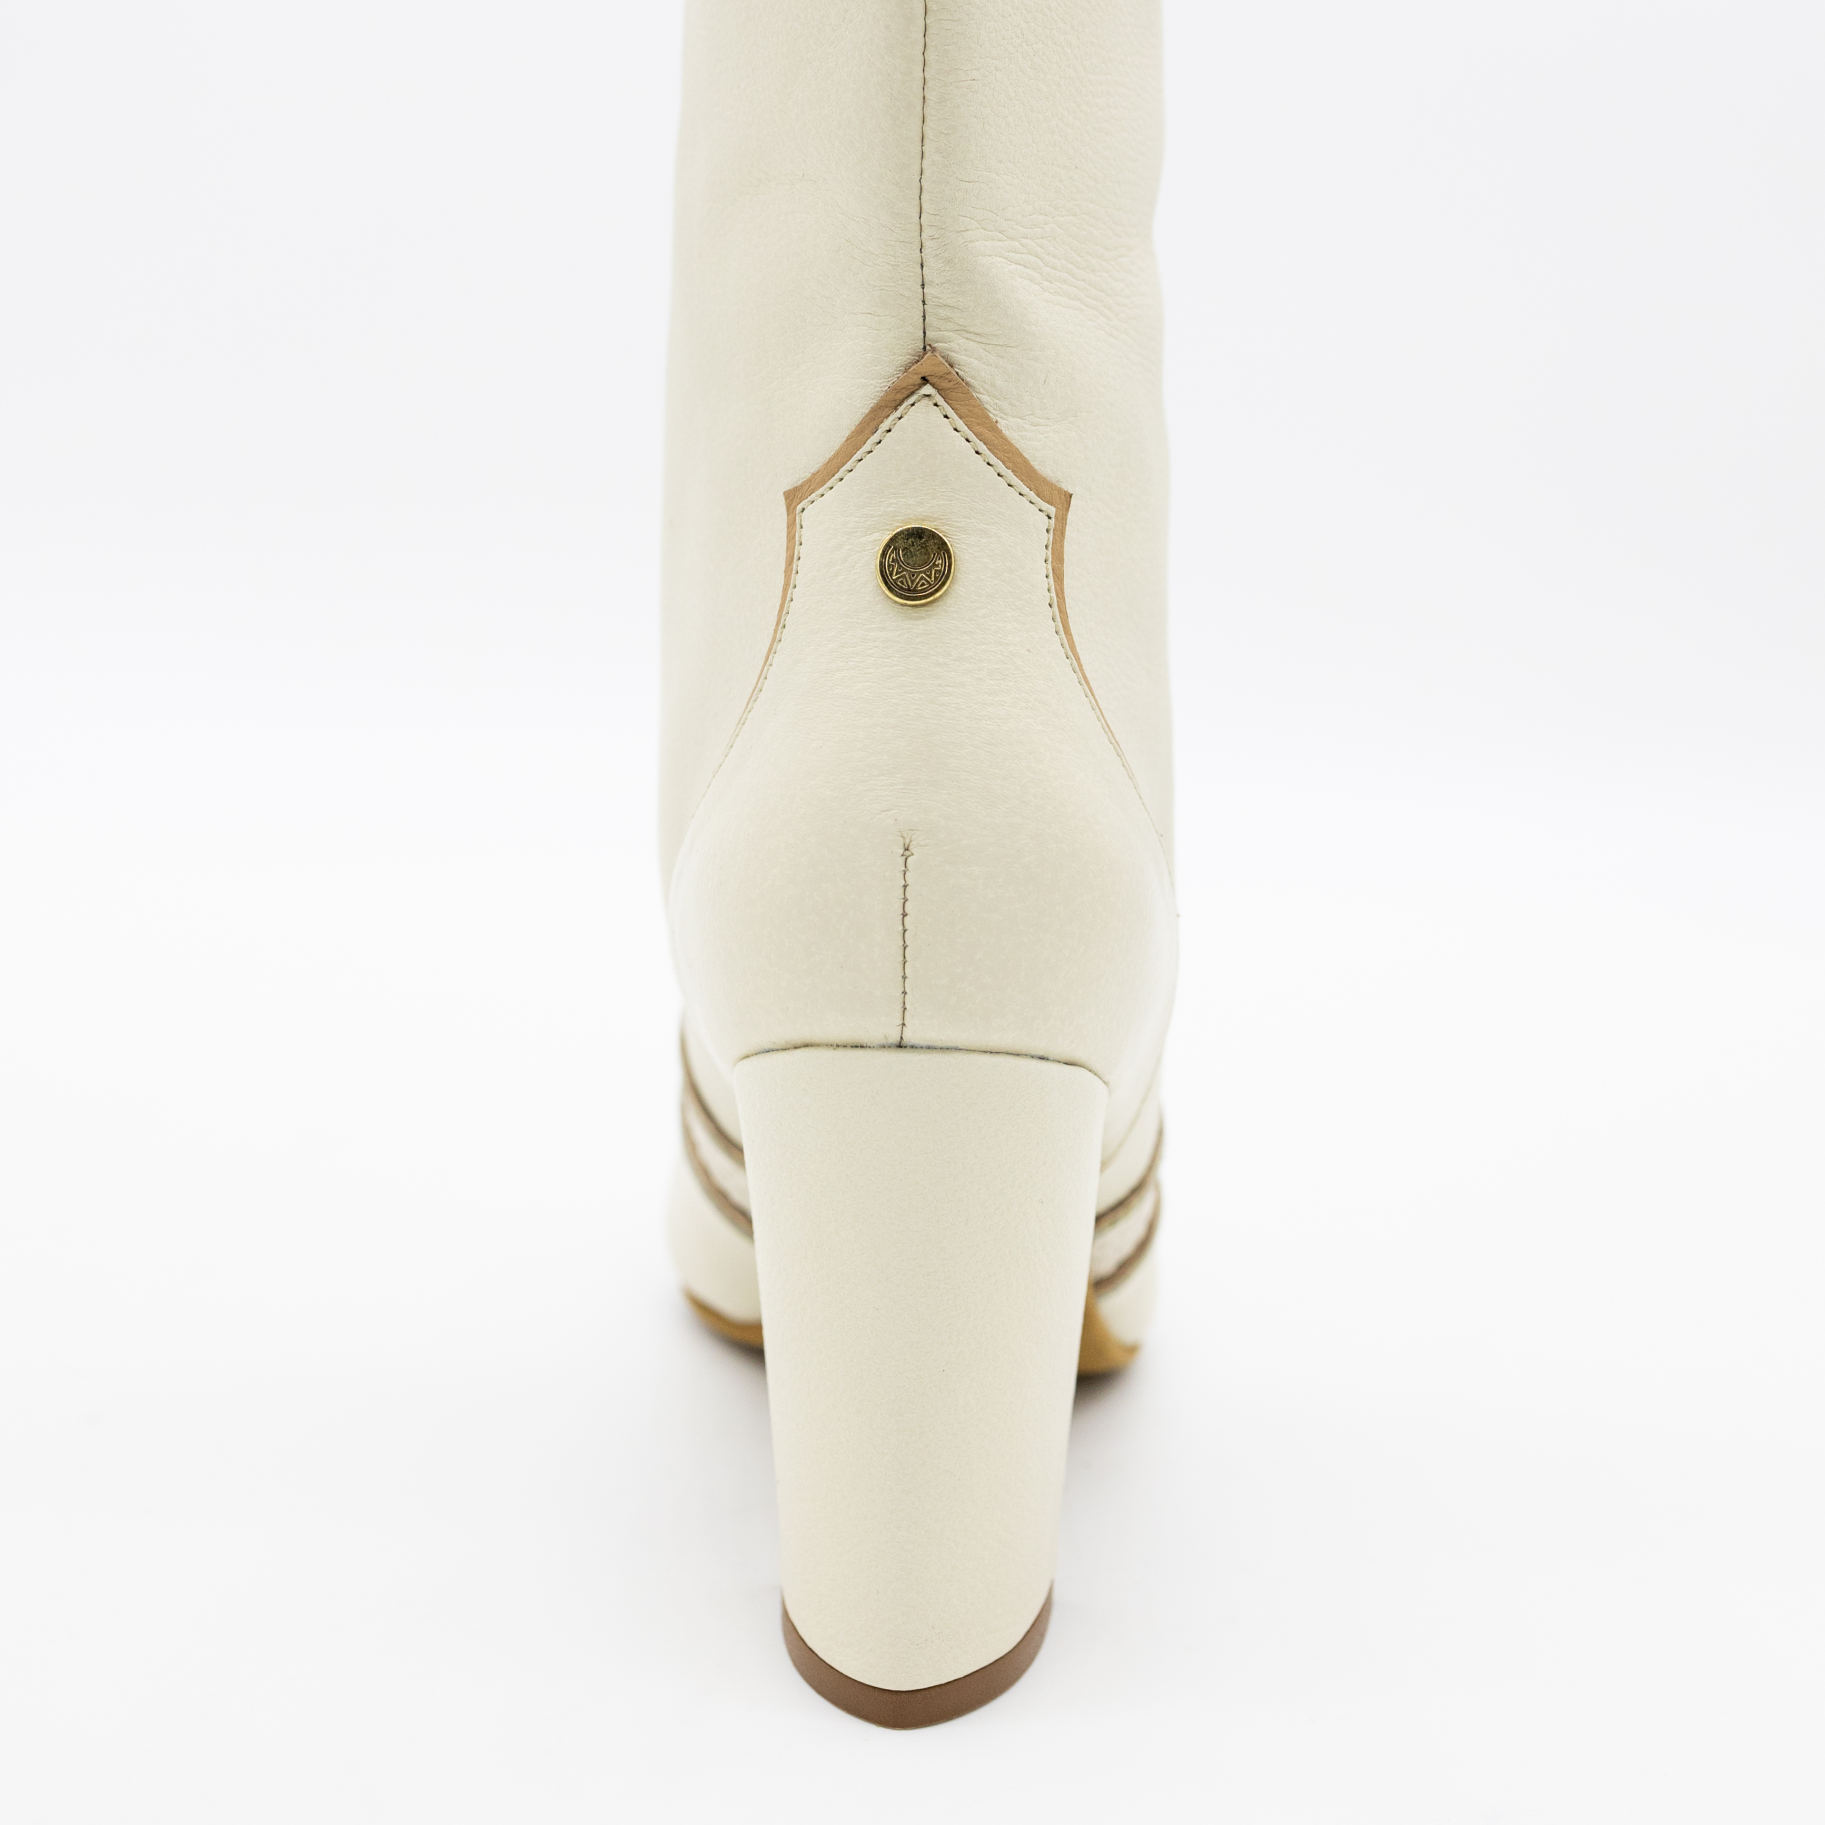 Handcrafted Leather Western Inspired Boots, Ivory White Smooth and Embossed Leather, and Tan Arequipe Smooth Leather. Stivali New York